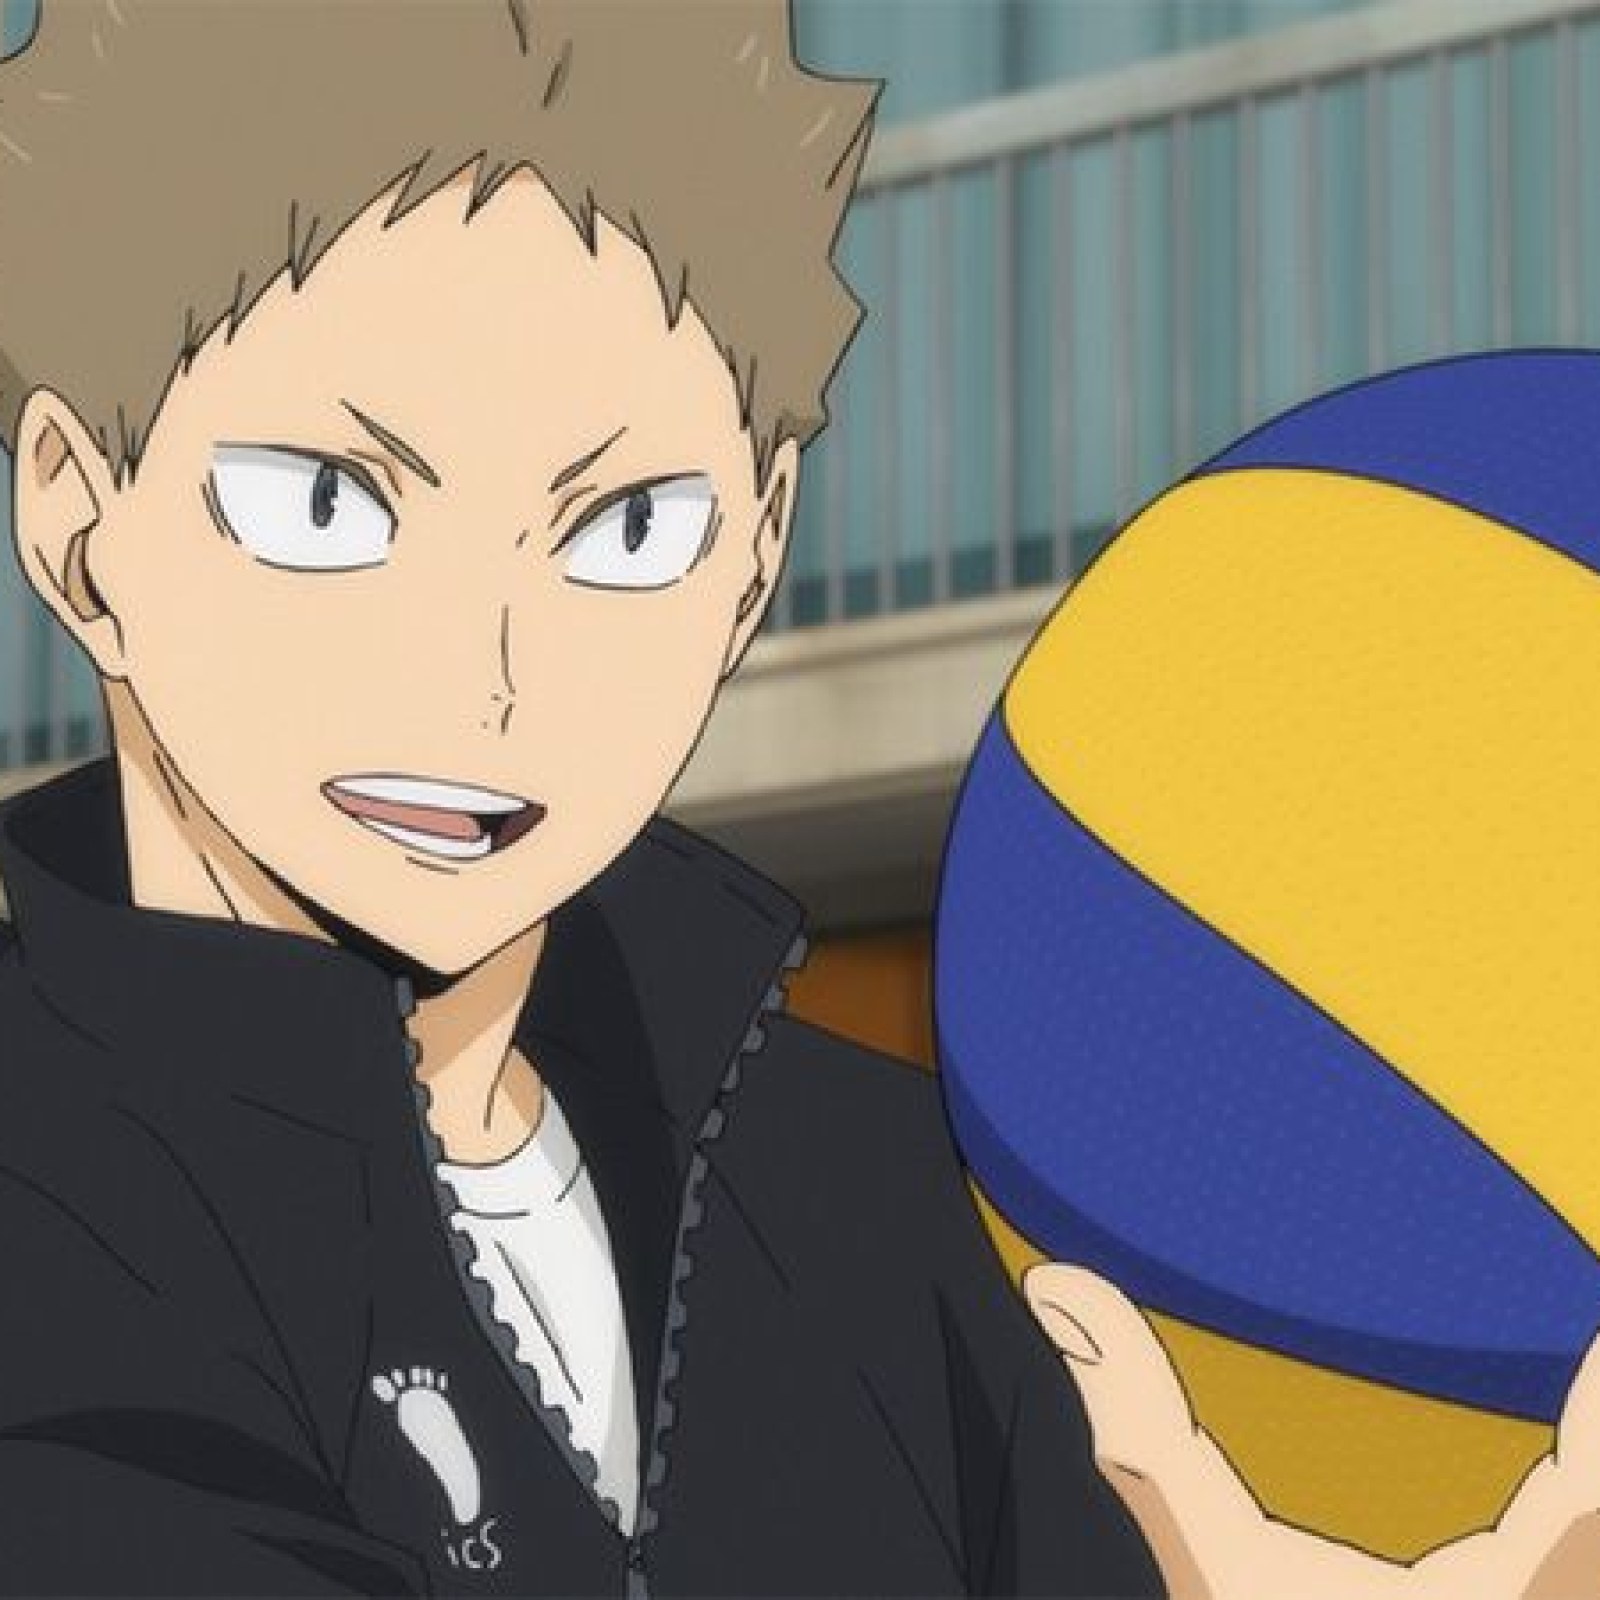 Haikyuu!!' Season 4 Episode 8 Review: Practice Match With Date Tech  Concludes